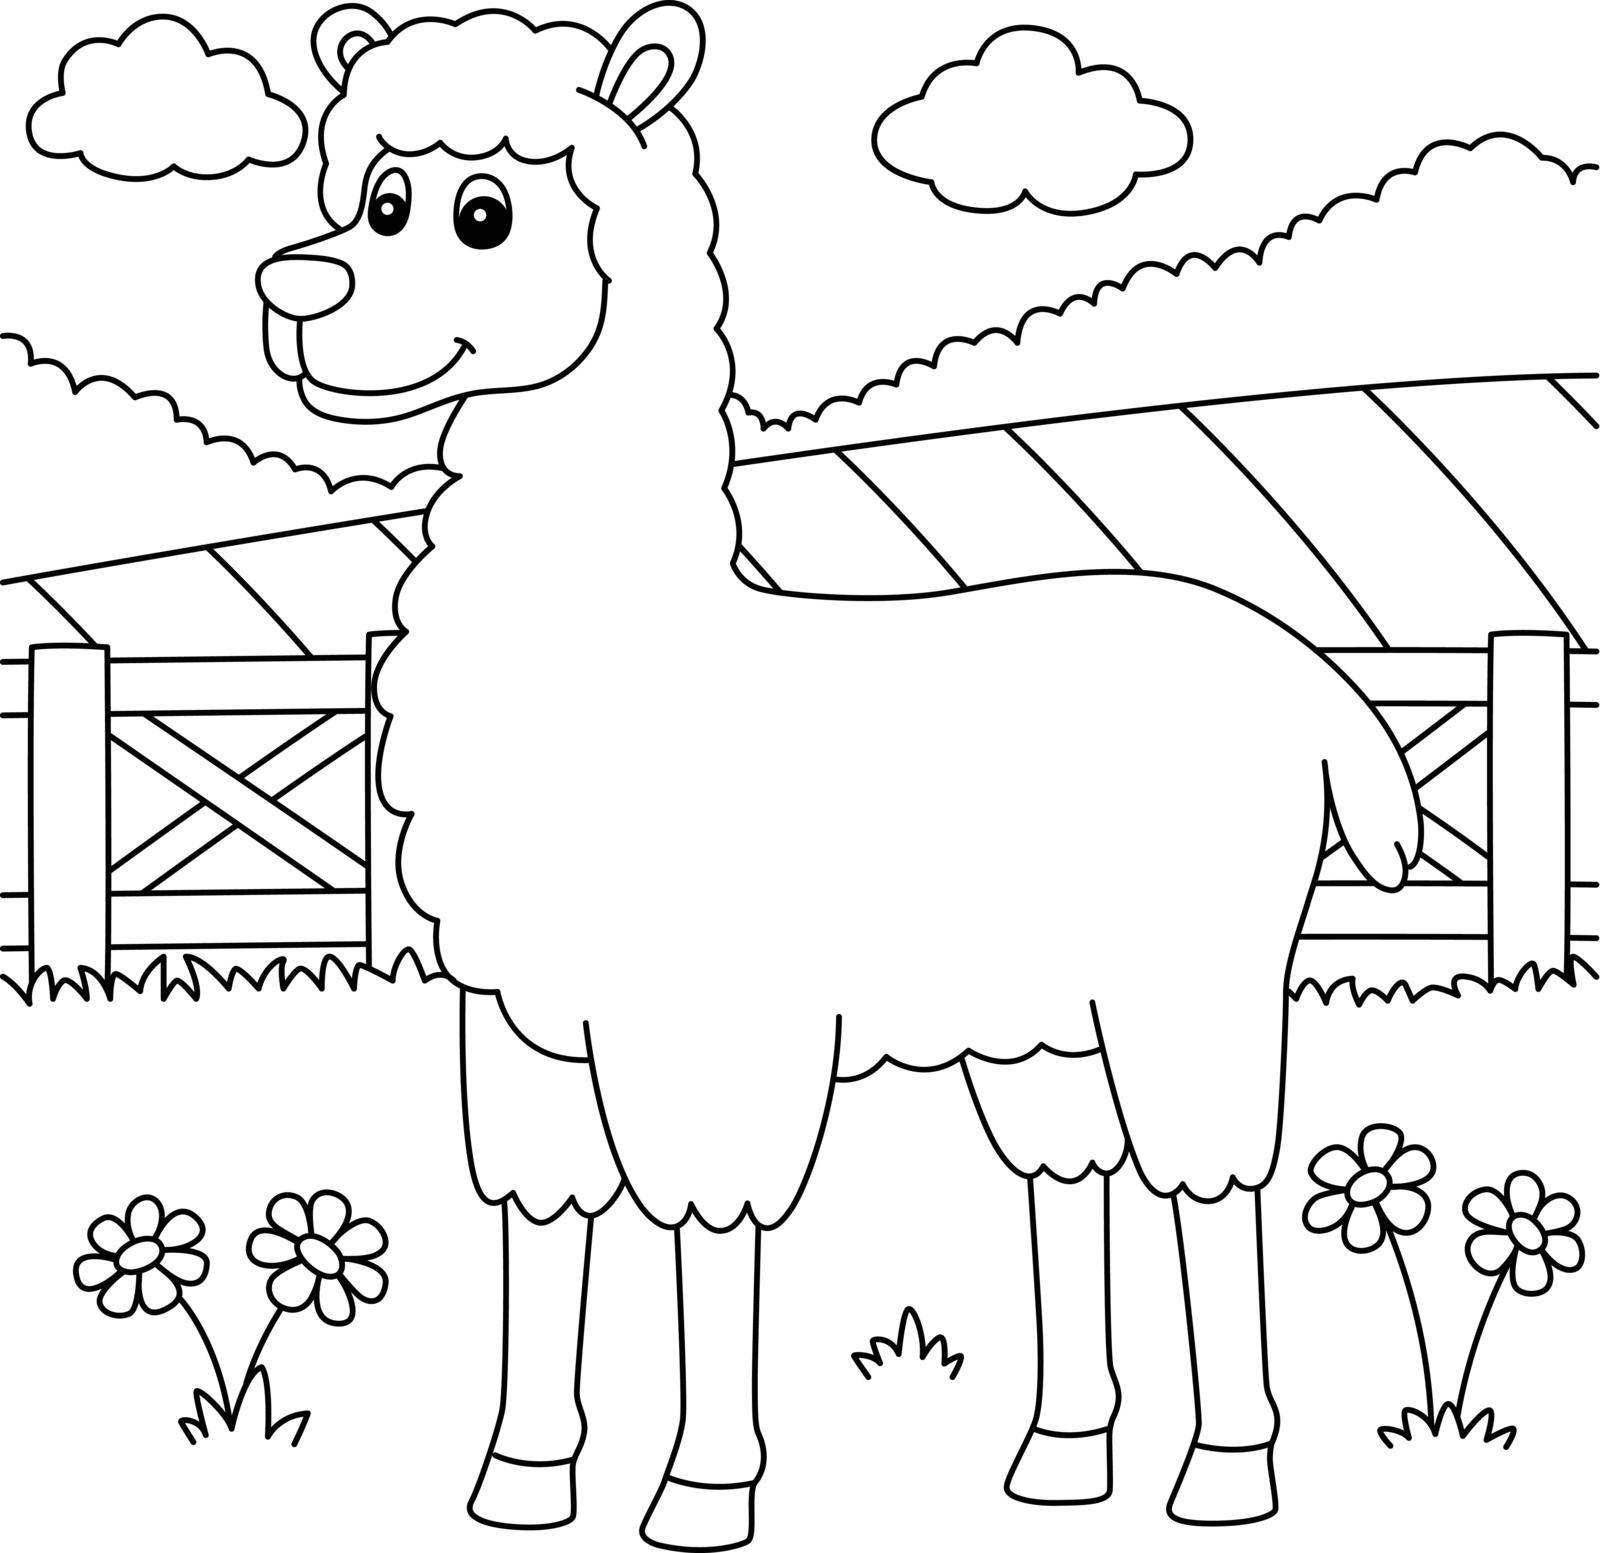 Llama Coloring Page for Kids by abbydesign